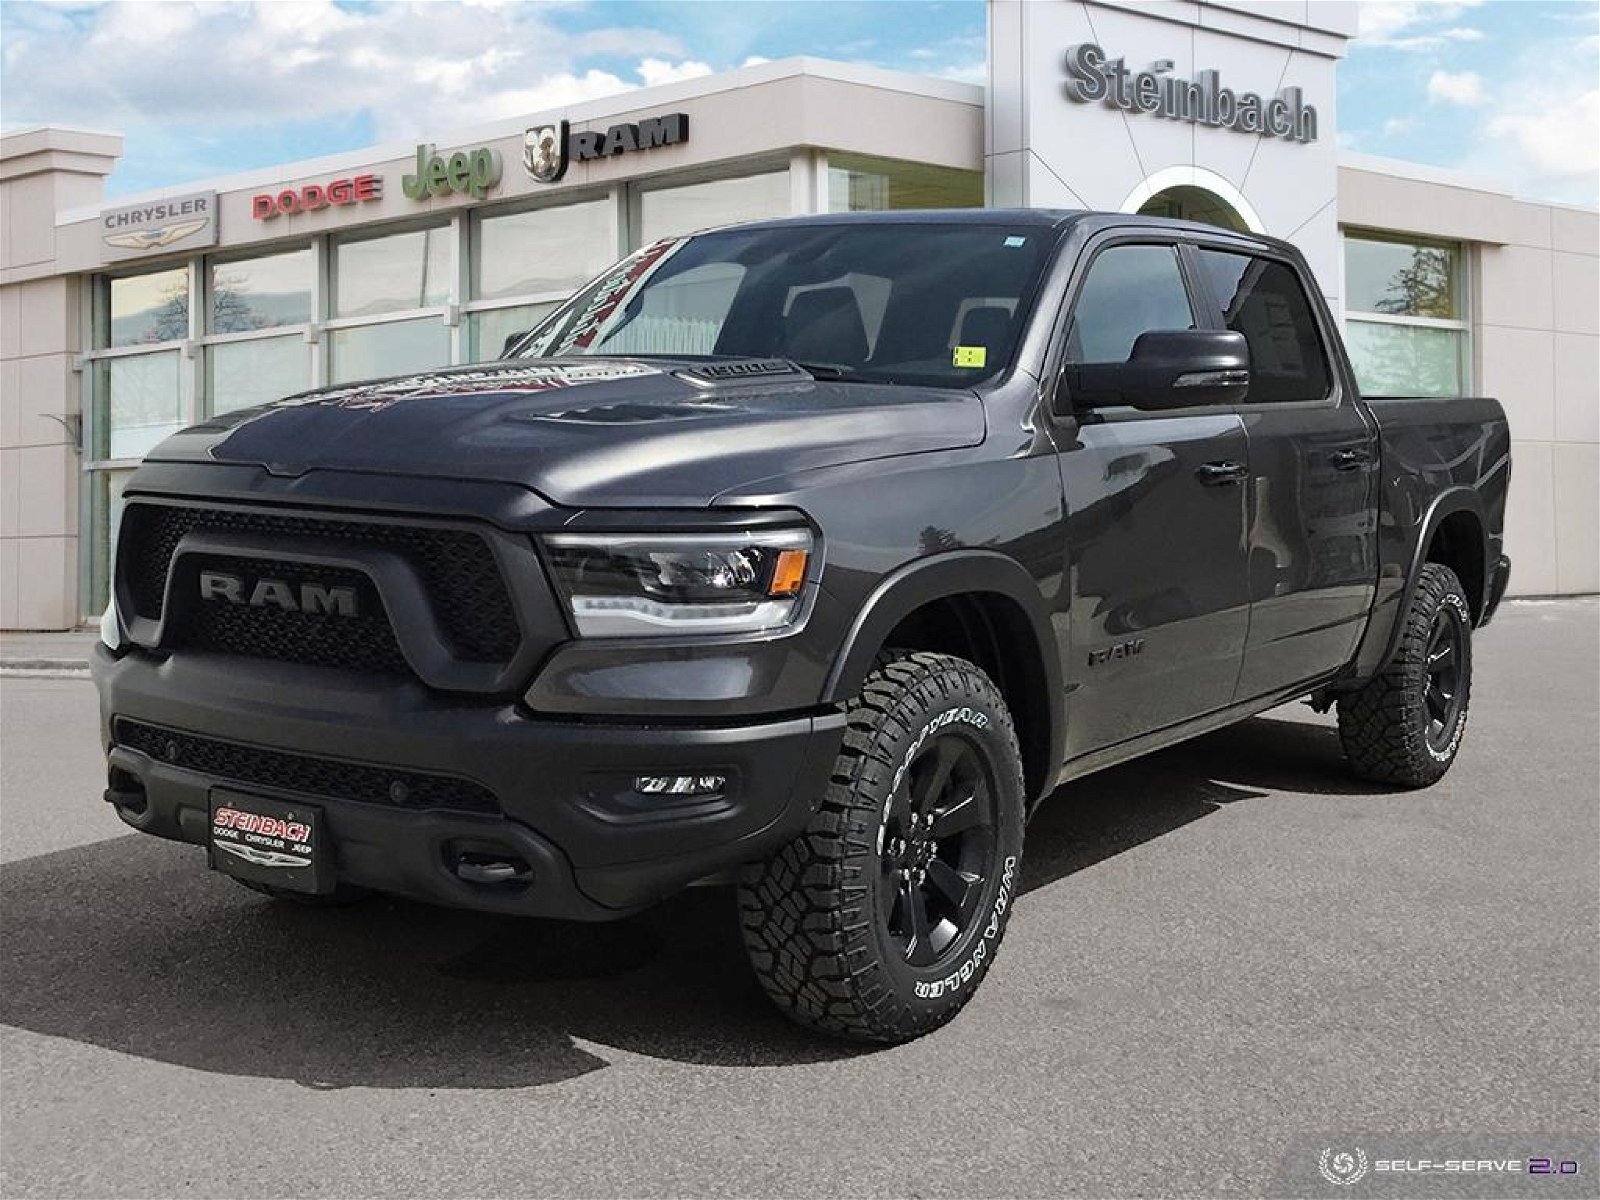 2023 Ram 1500 Rebel Save Up To 10% off MSRP